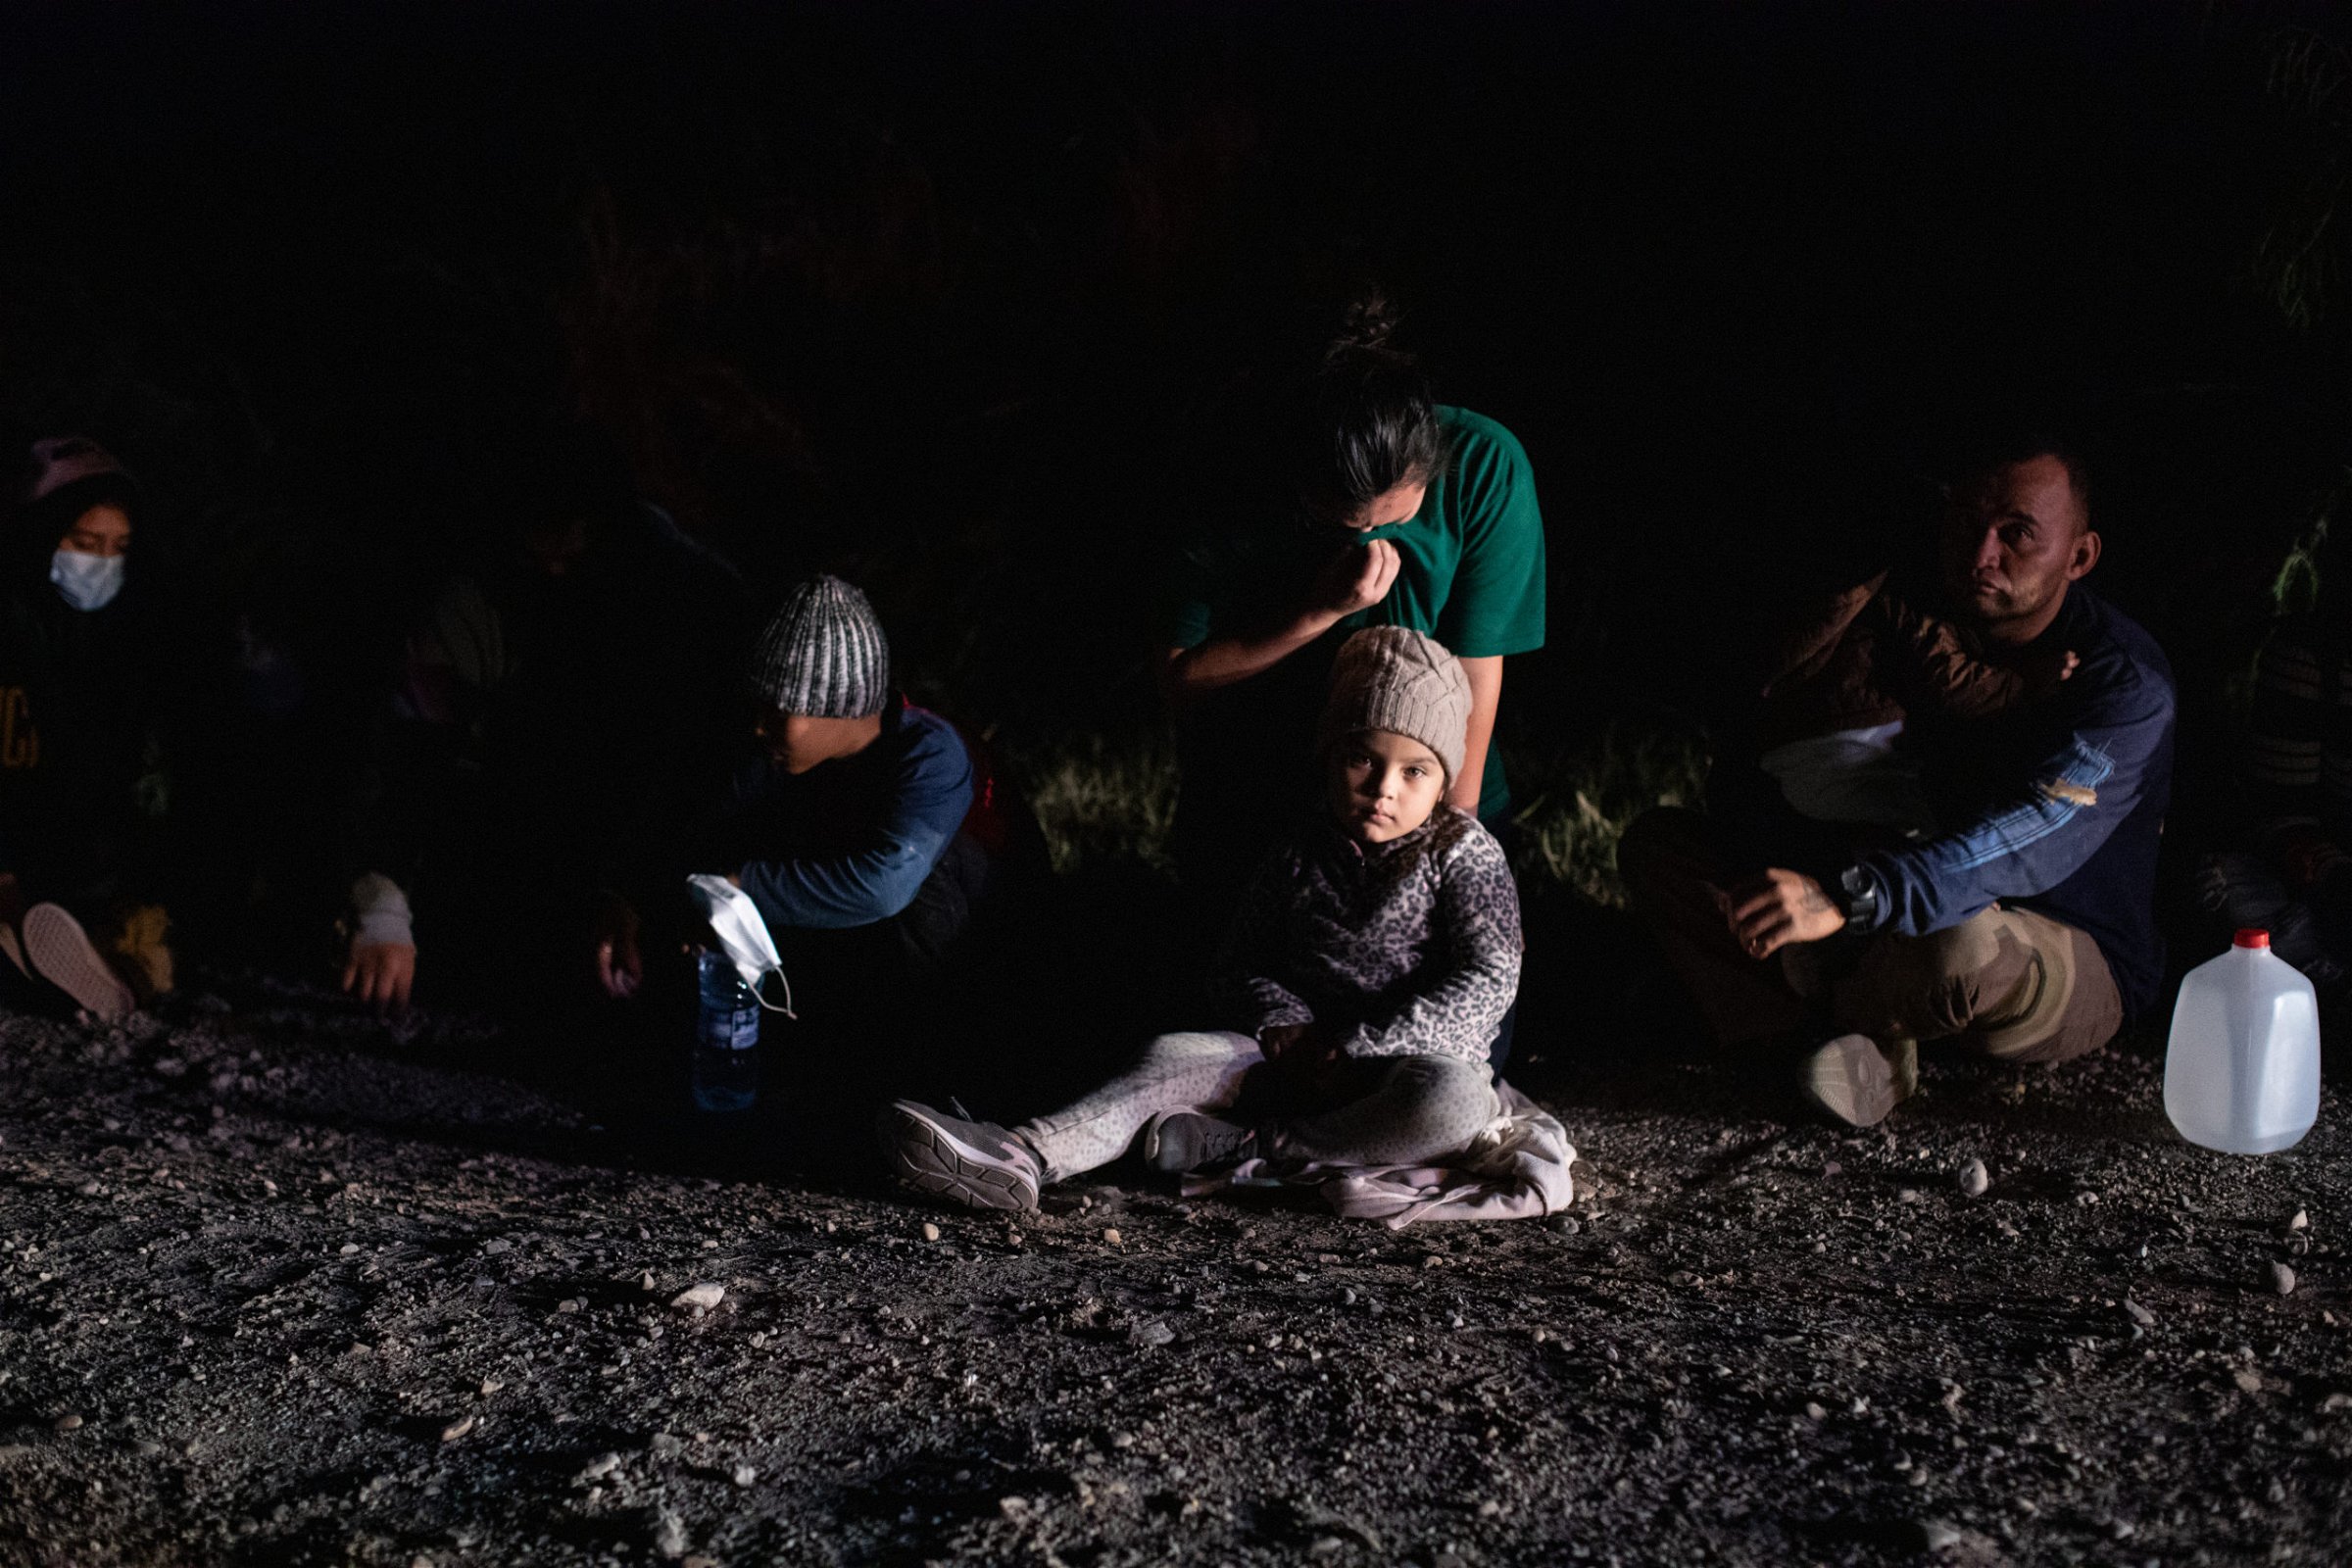 Illegal migrants sit in a line and wait to be processed by law enforcement officials who gathered biometrical data from them before transporting them to a processing facility in La Joya, Texas, on March 25, 2021. (Kaylee Greenlee. - Daily Caller News Foundation)